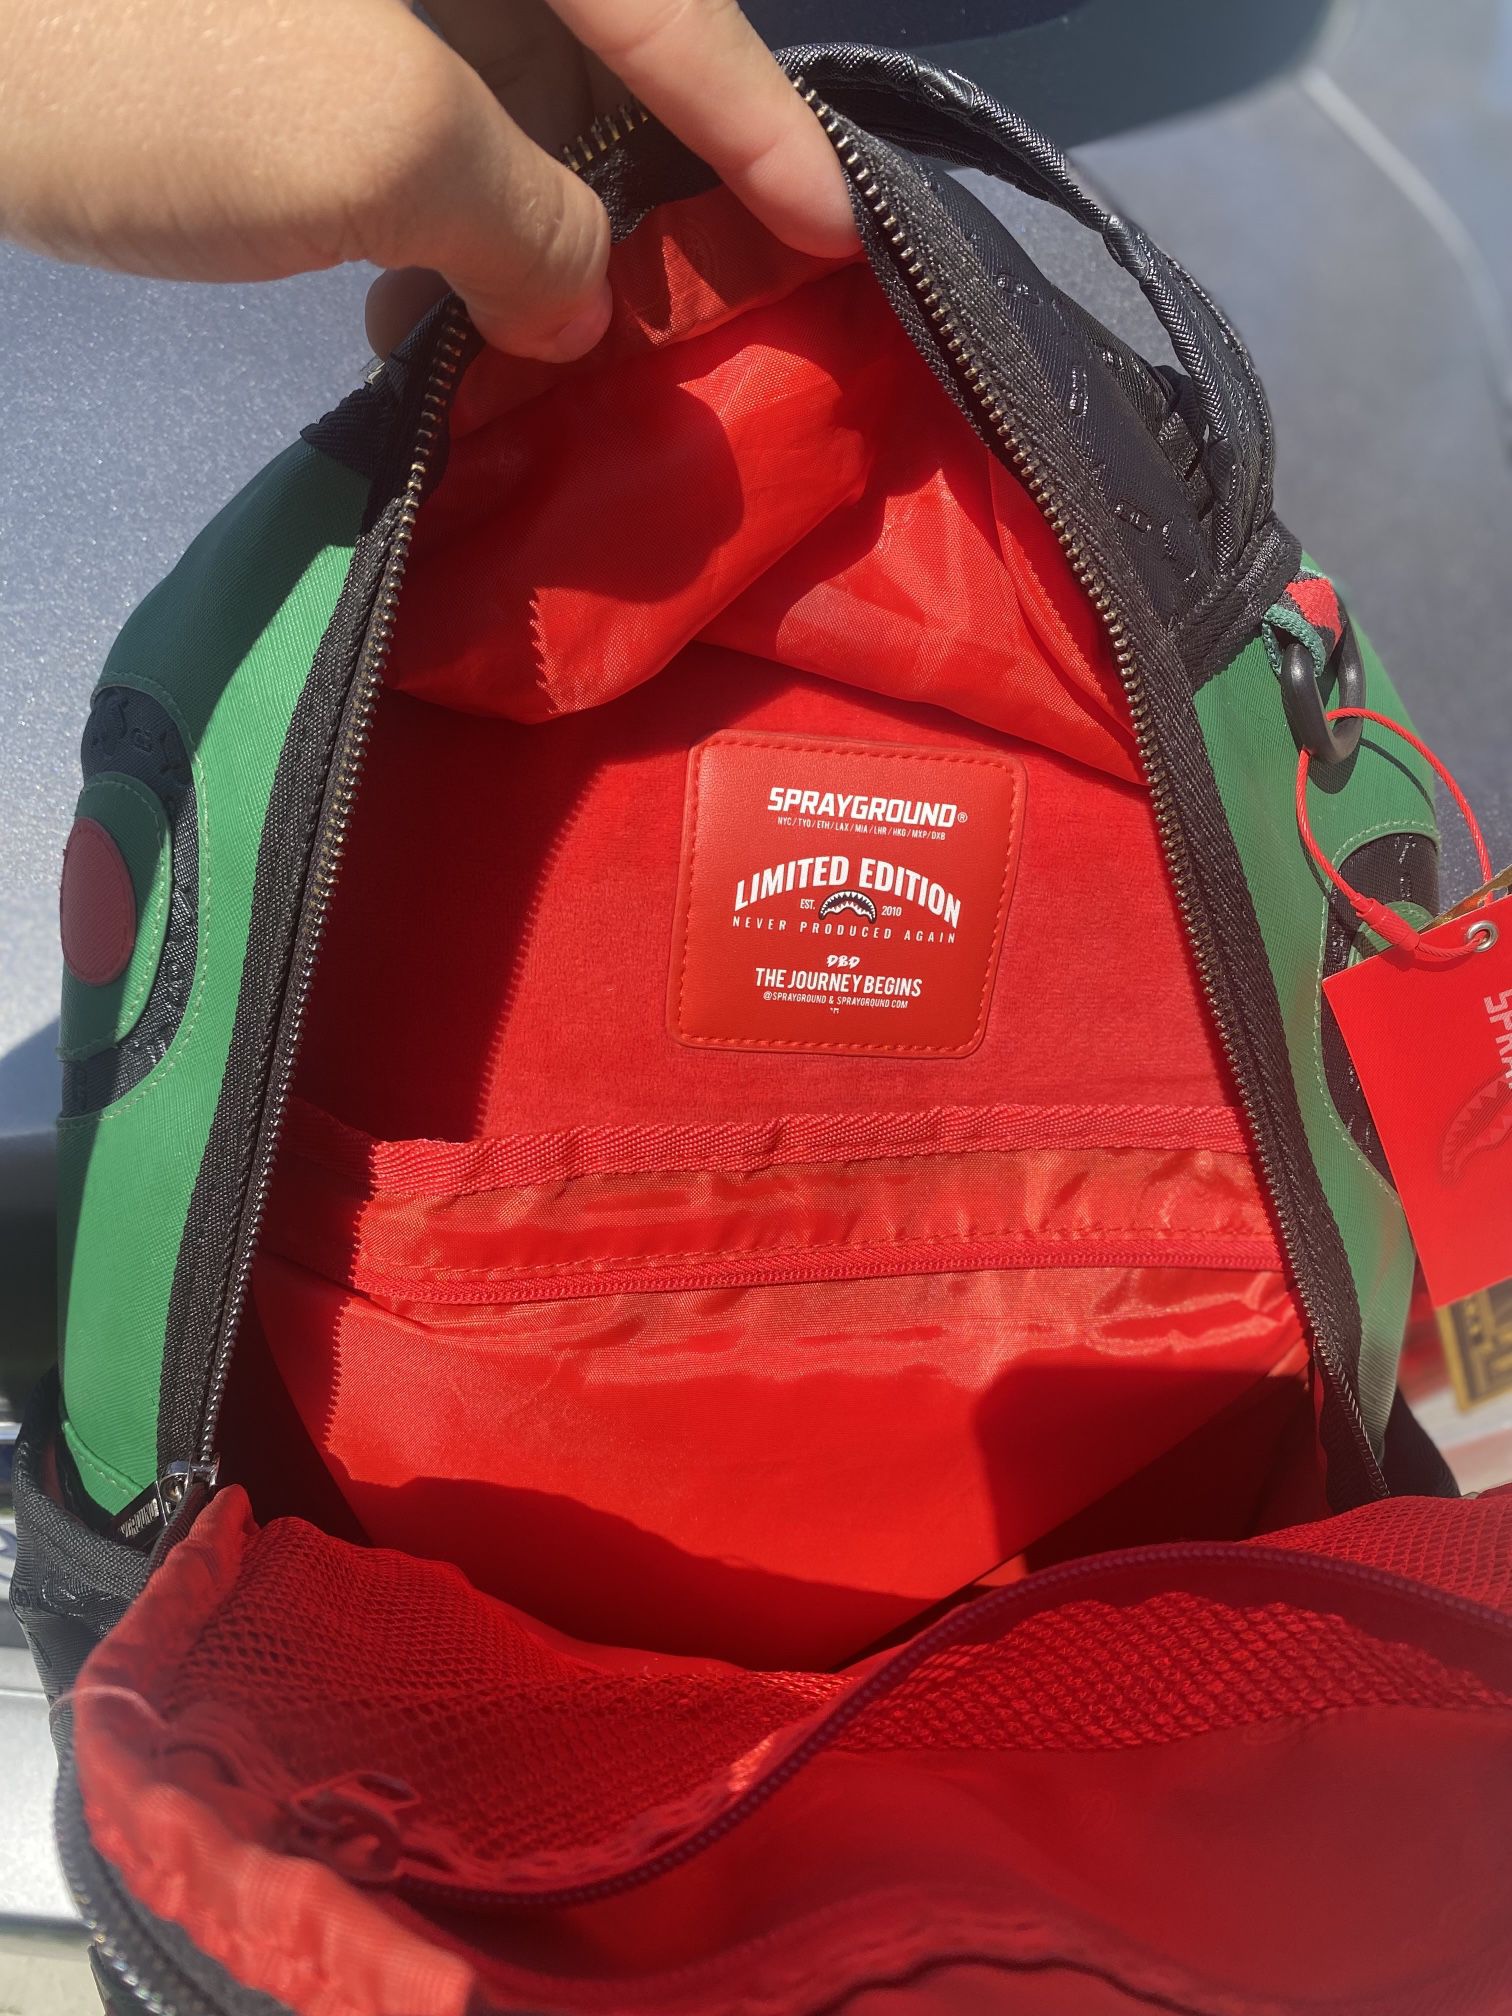 Sprayground MINI DUFFLE and Pouch for Sale in Hawthorne, CA - OfferUp